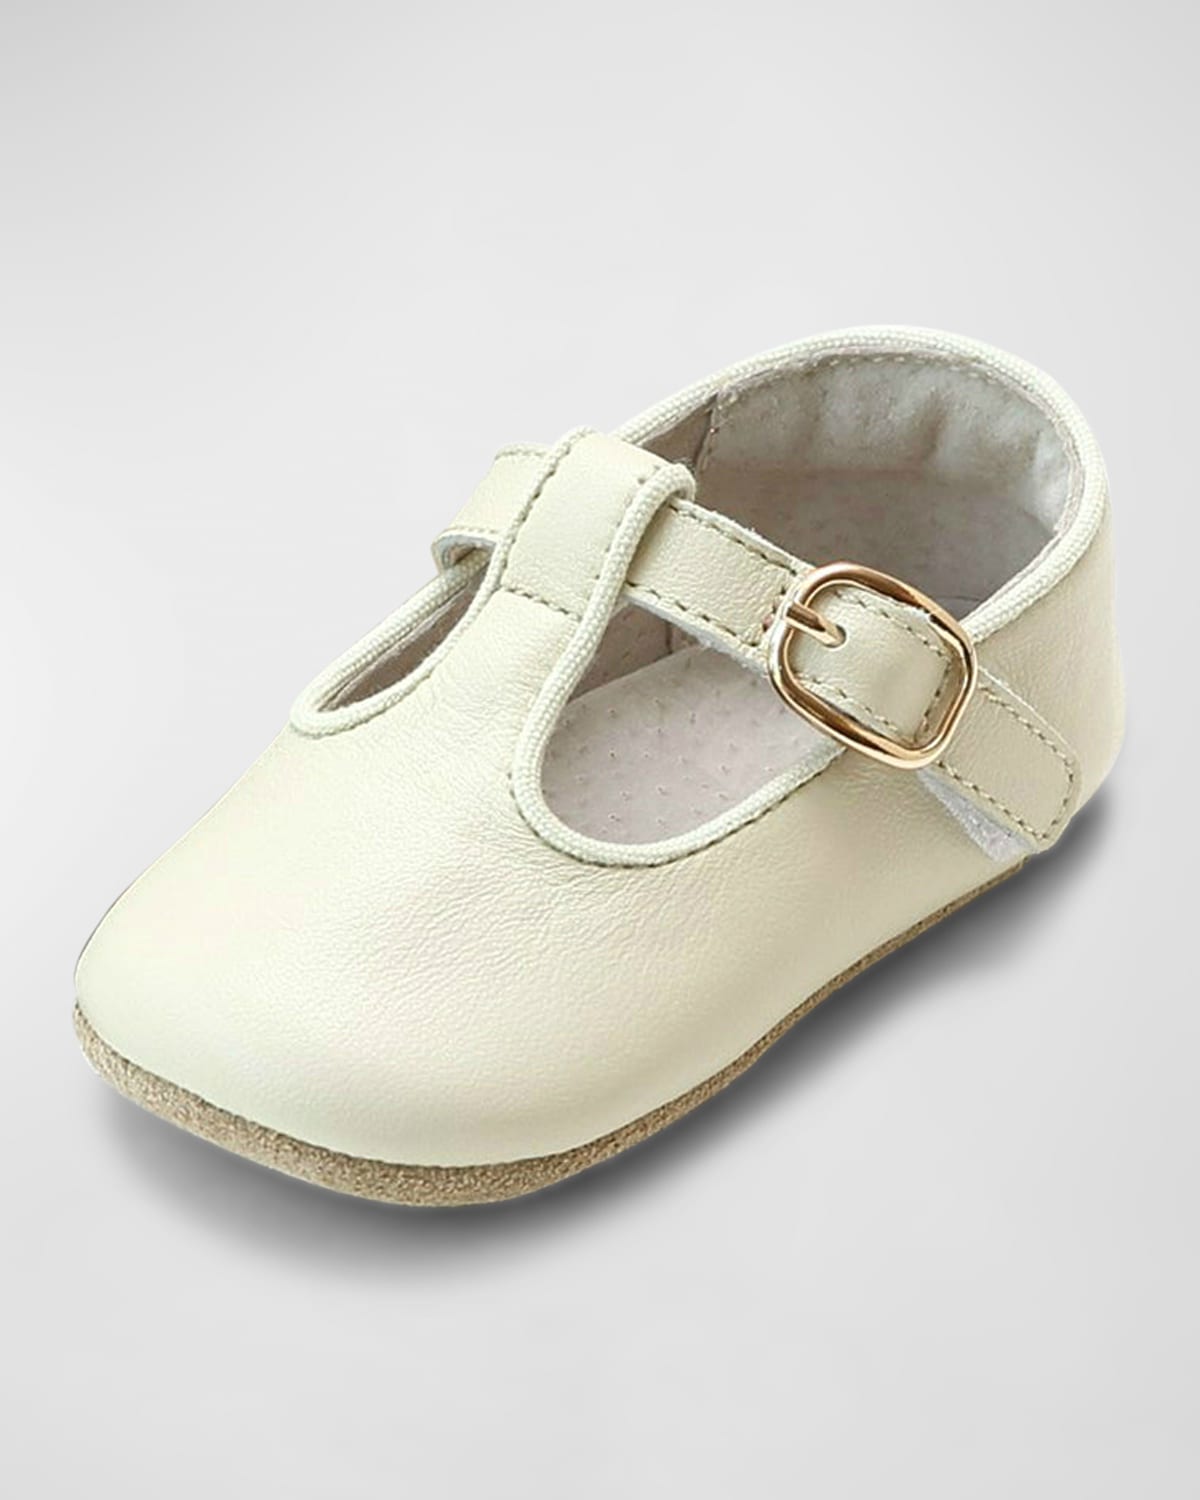 L'amour Shoes Kids' Girl's Evie T-strap Mary Jane Crib Shoes, Newborn/baby In Ecru